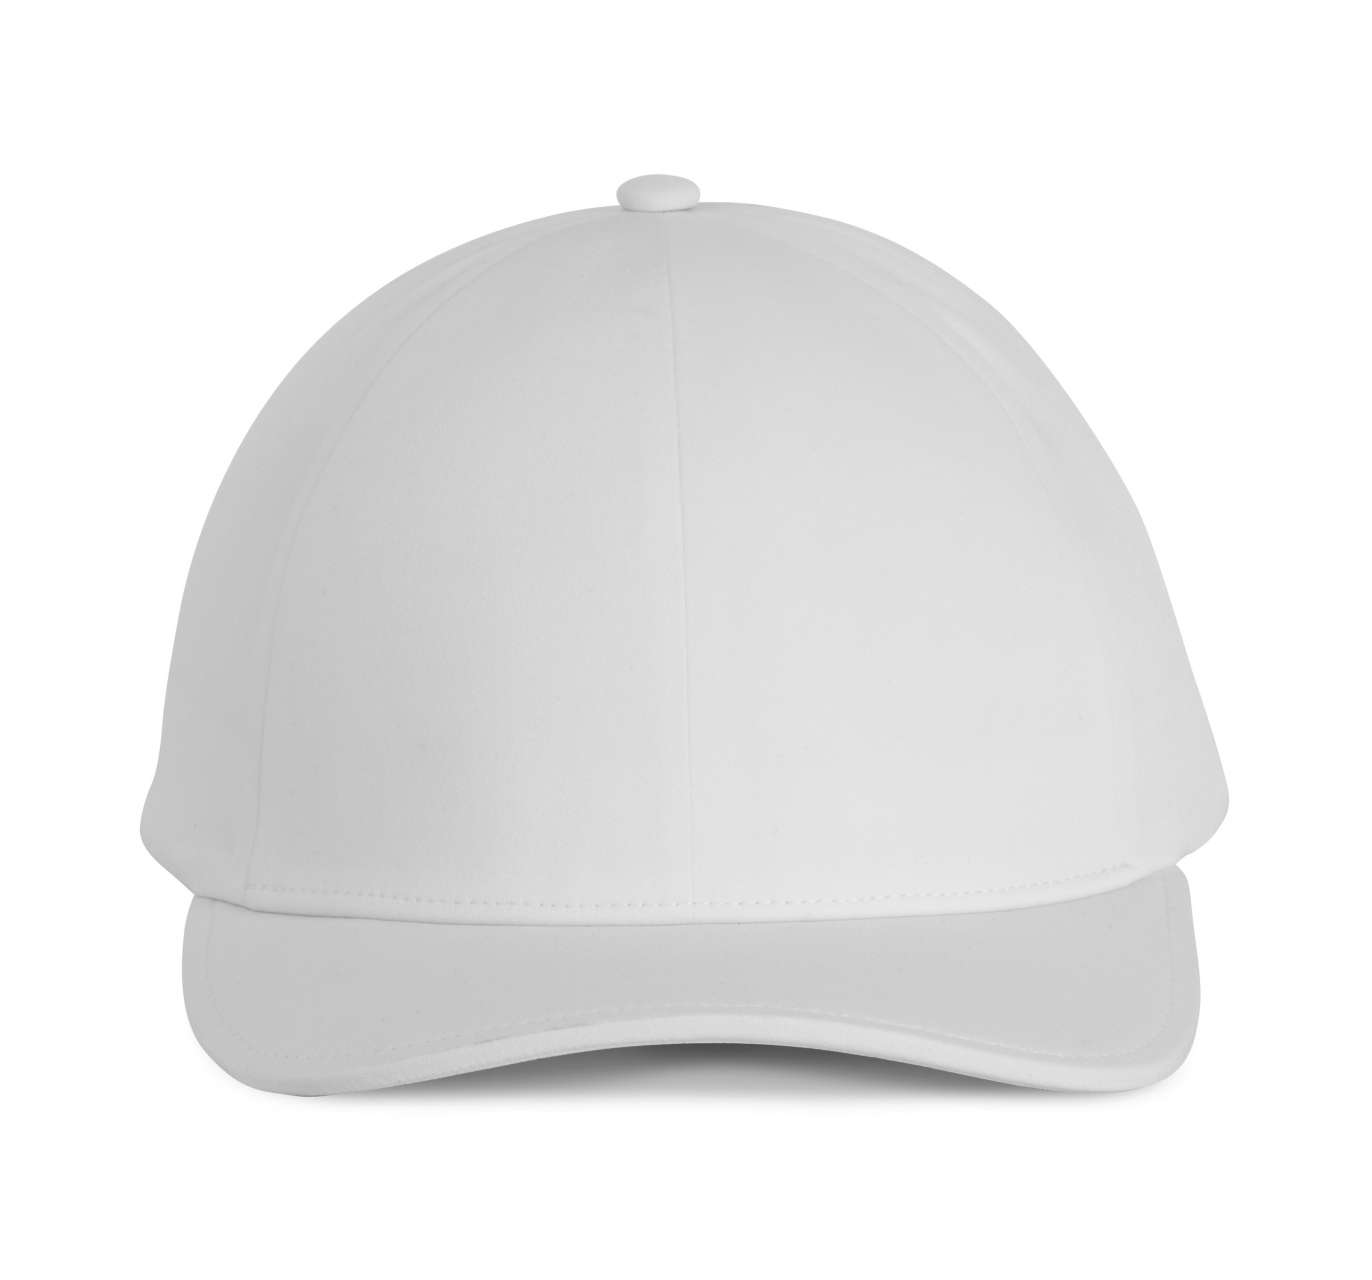 6 PANEL SEAMLESS CAP WITH ELASTICATED BAND s tiskom 